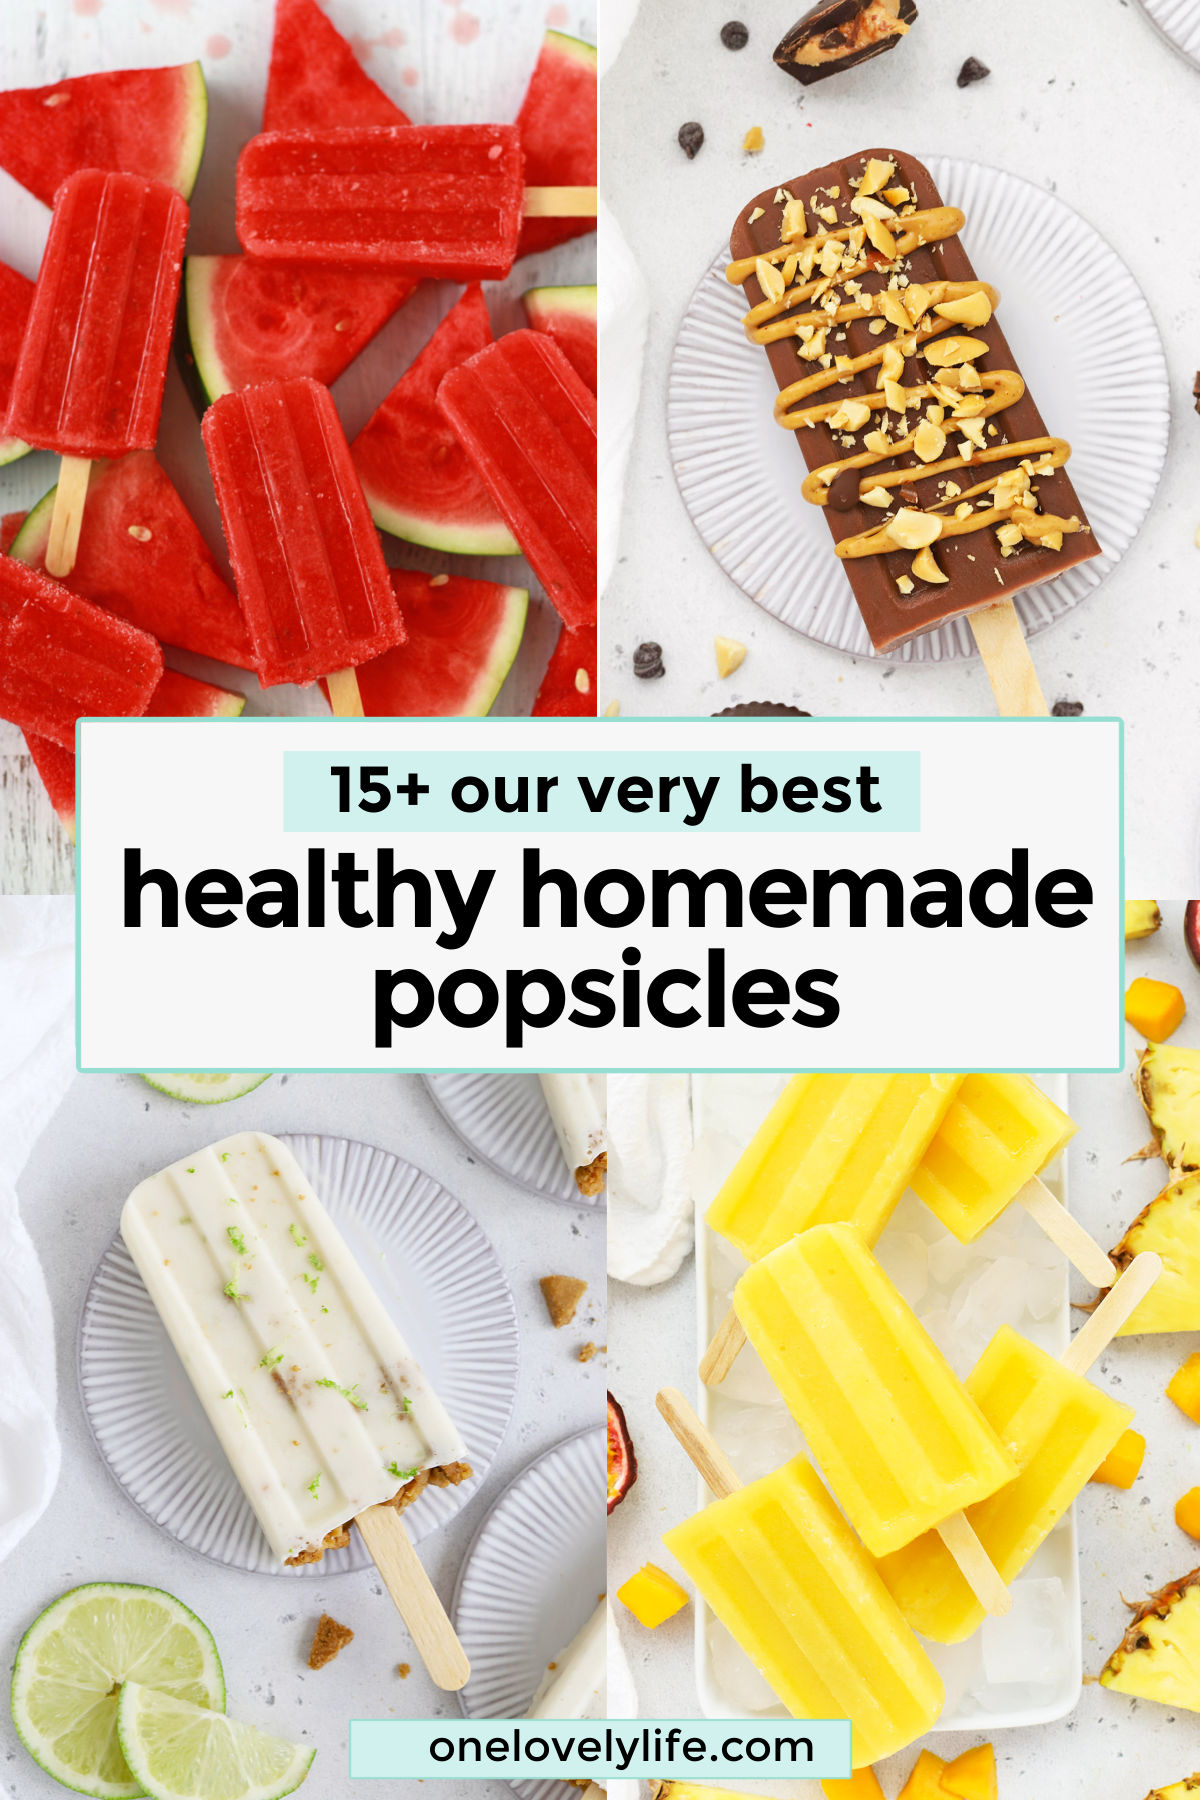 The BEST Healthy Homemade Popsicles - Some of the BEST healthy popsicle recipes on the net! (Naturally-sweetened, gluten-free & dairy-free!) // Homemade Popsicle Recipe // Healthy Popsicles // Vegan Popsicles // Paleo Popsicles // Healthy Ice Pops